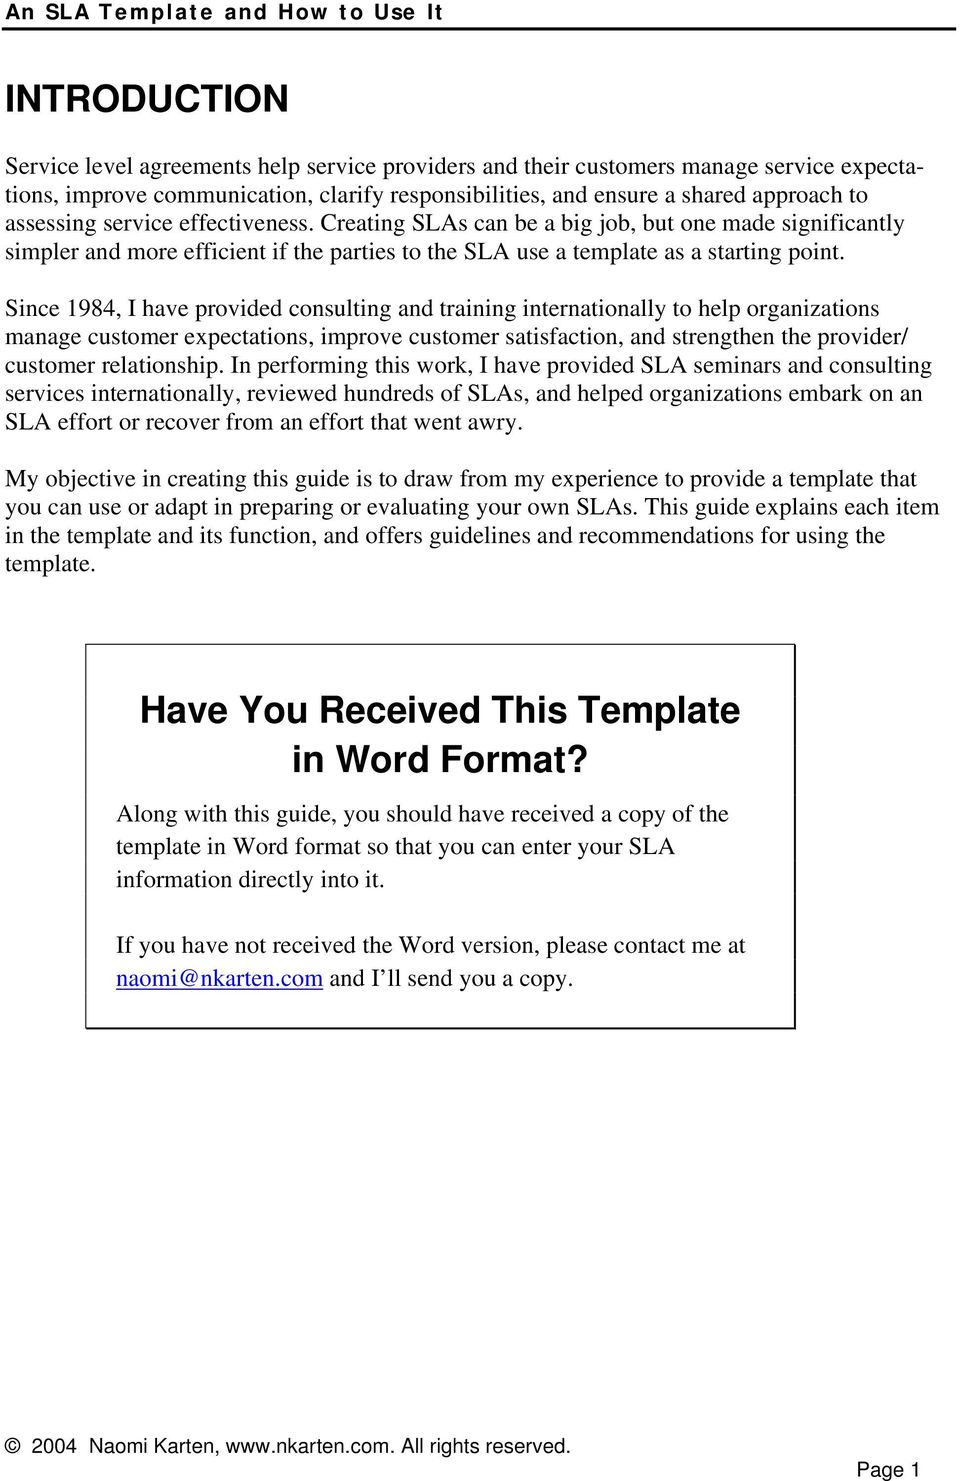 An SLA Template. How to Use It - PDF Free Download For information technology service level agreement template